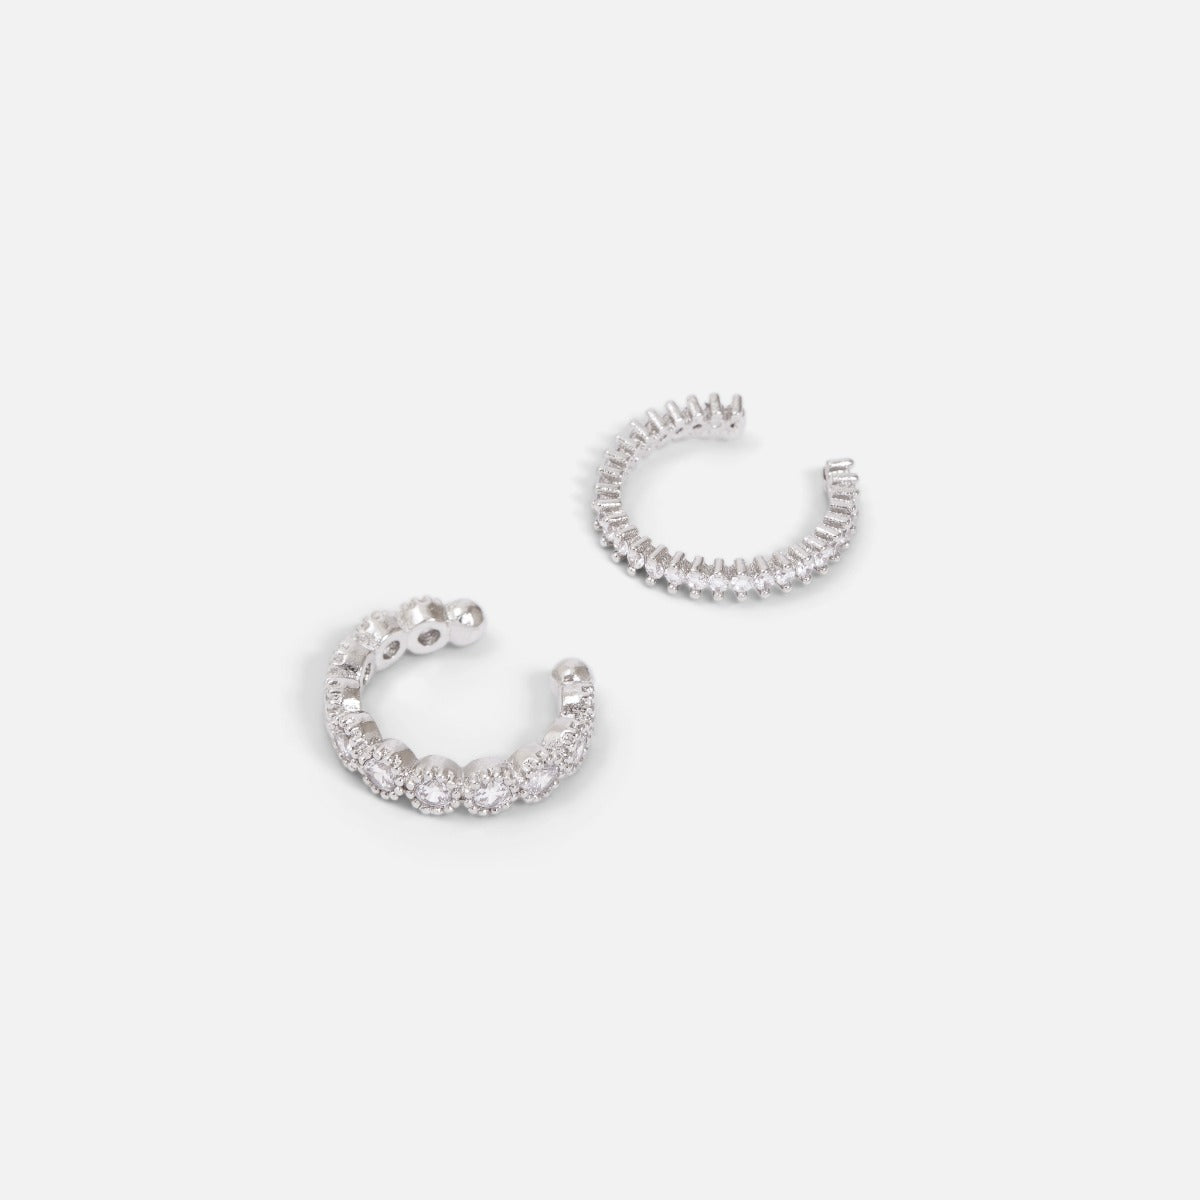 Set of silvered ear cuffs beads, stones and hoops